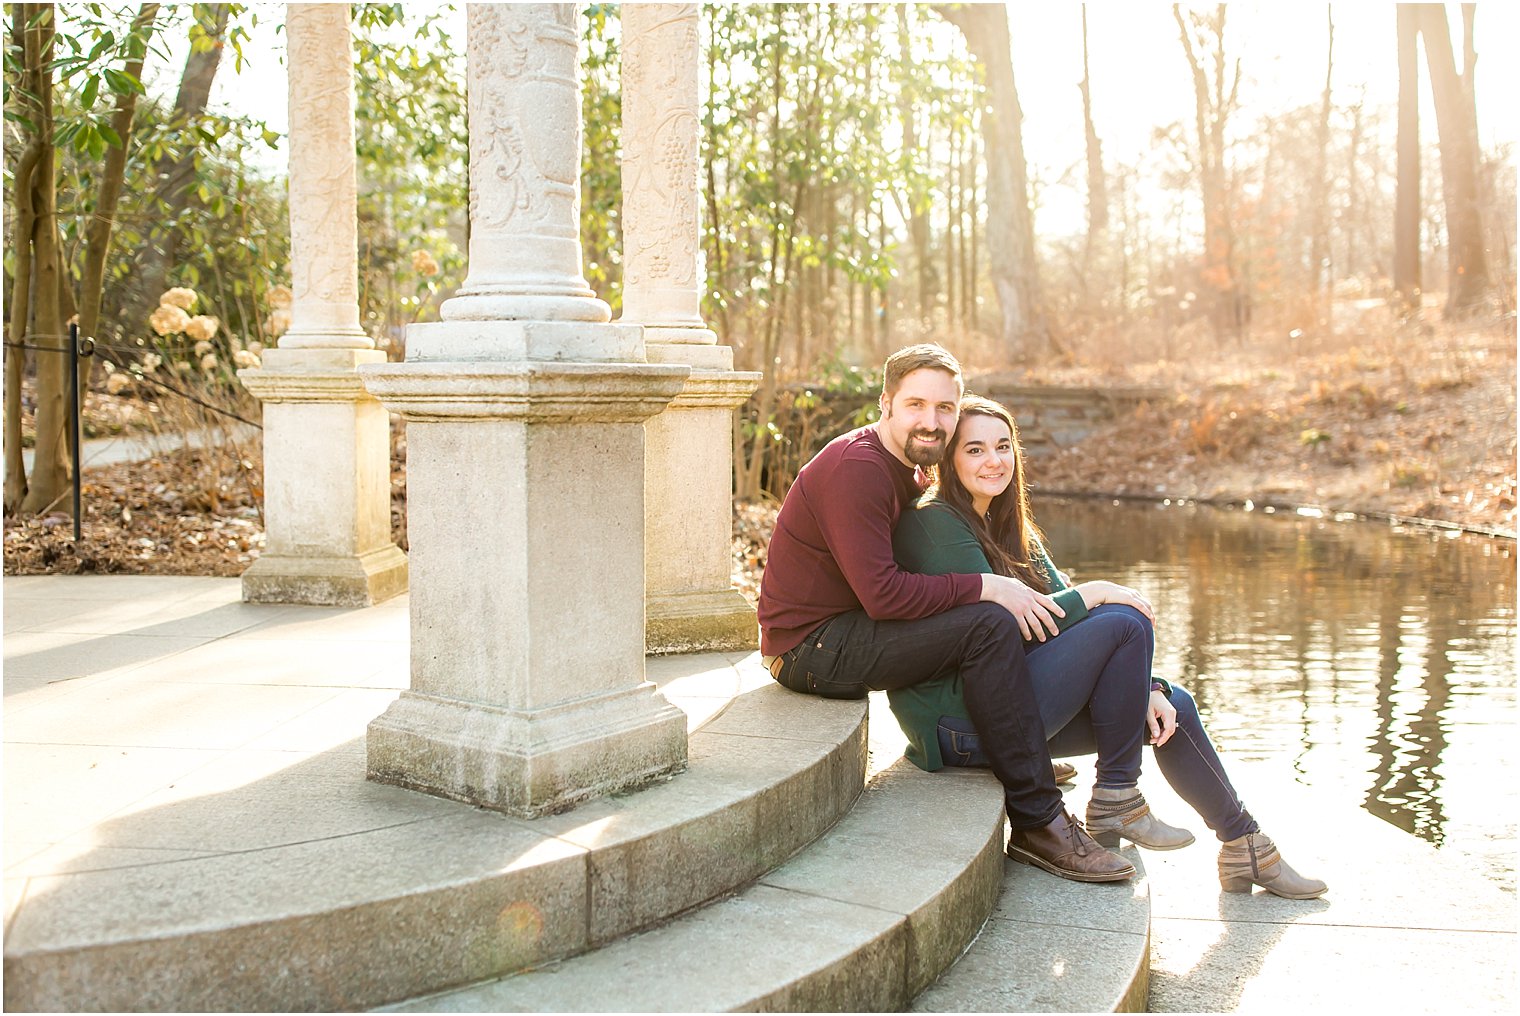 Unique locations for engagement sessions in PA | Photo by Idalia Photography